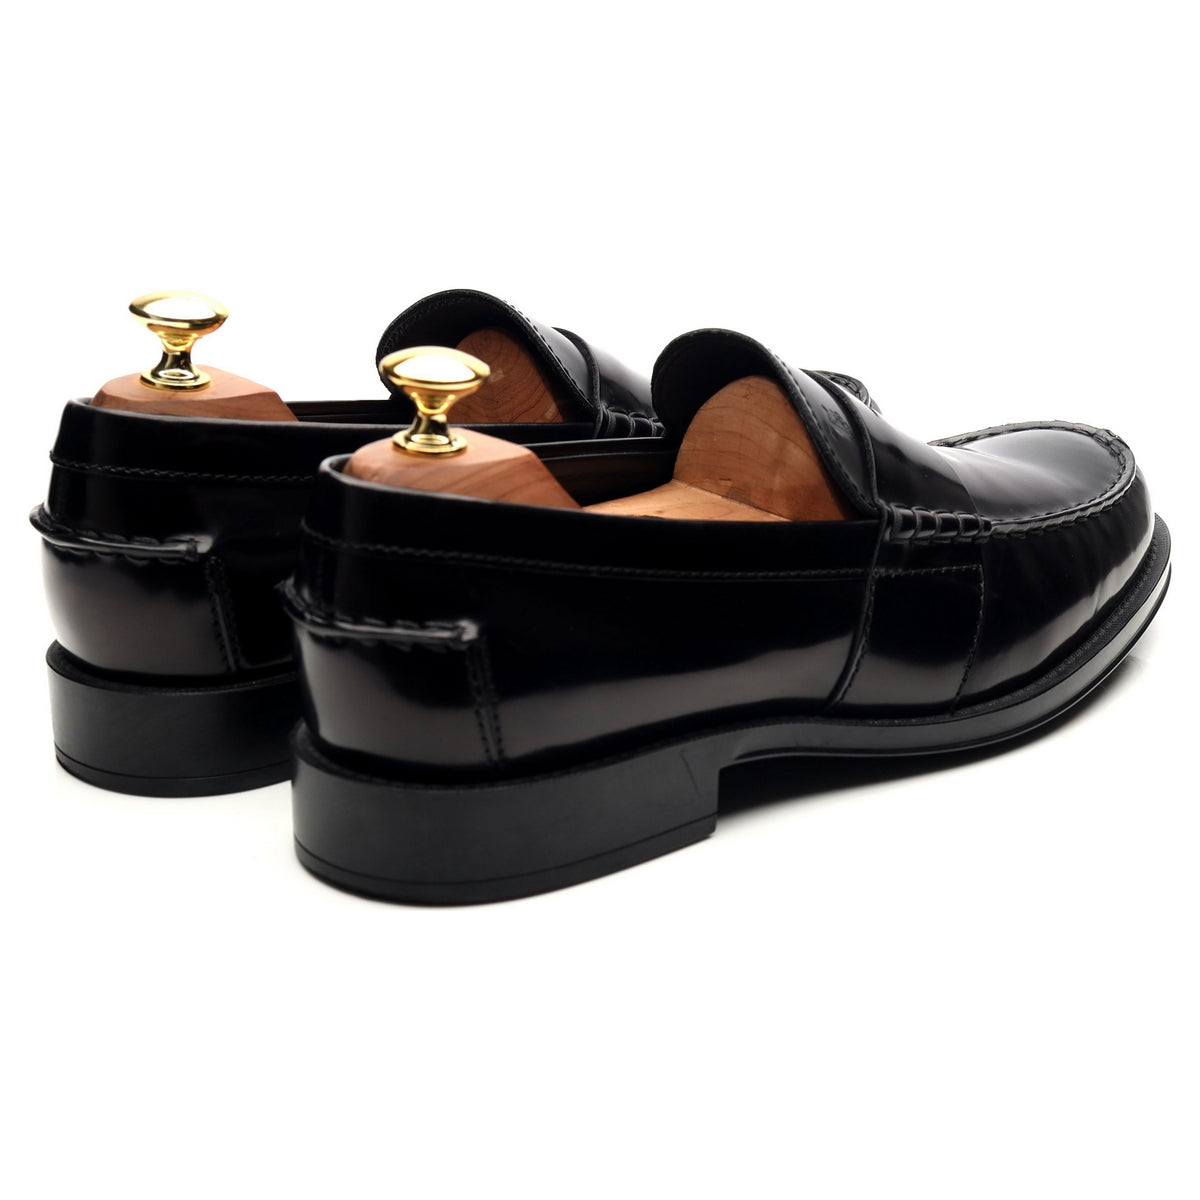 Black Leather Loafers UK 8